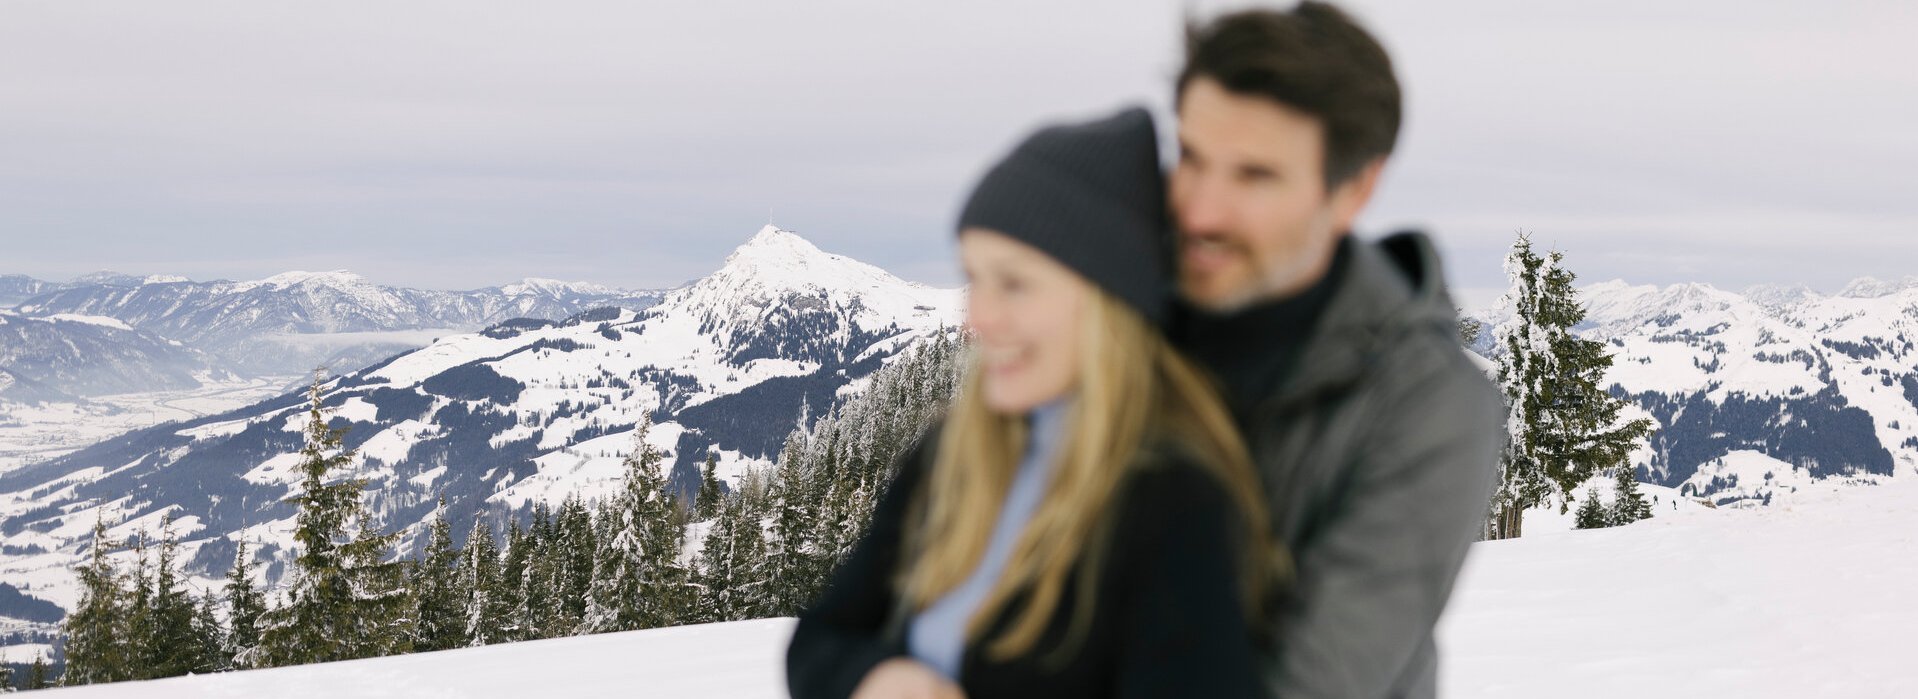 A couple embrace against the backdrop of the snow-covered Kitzbühel Alps